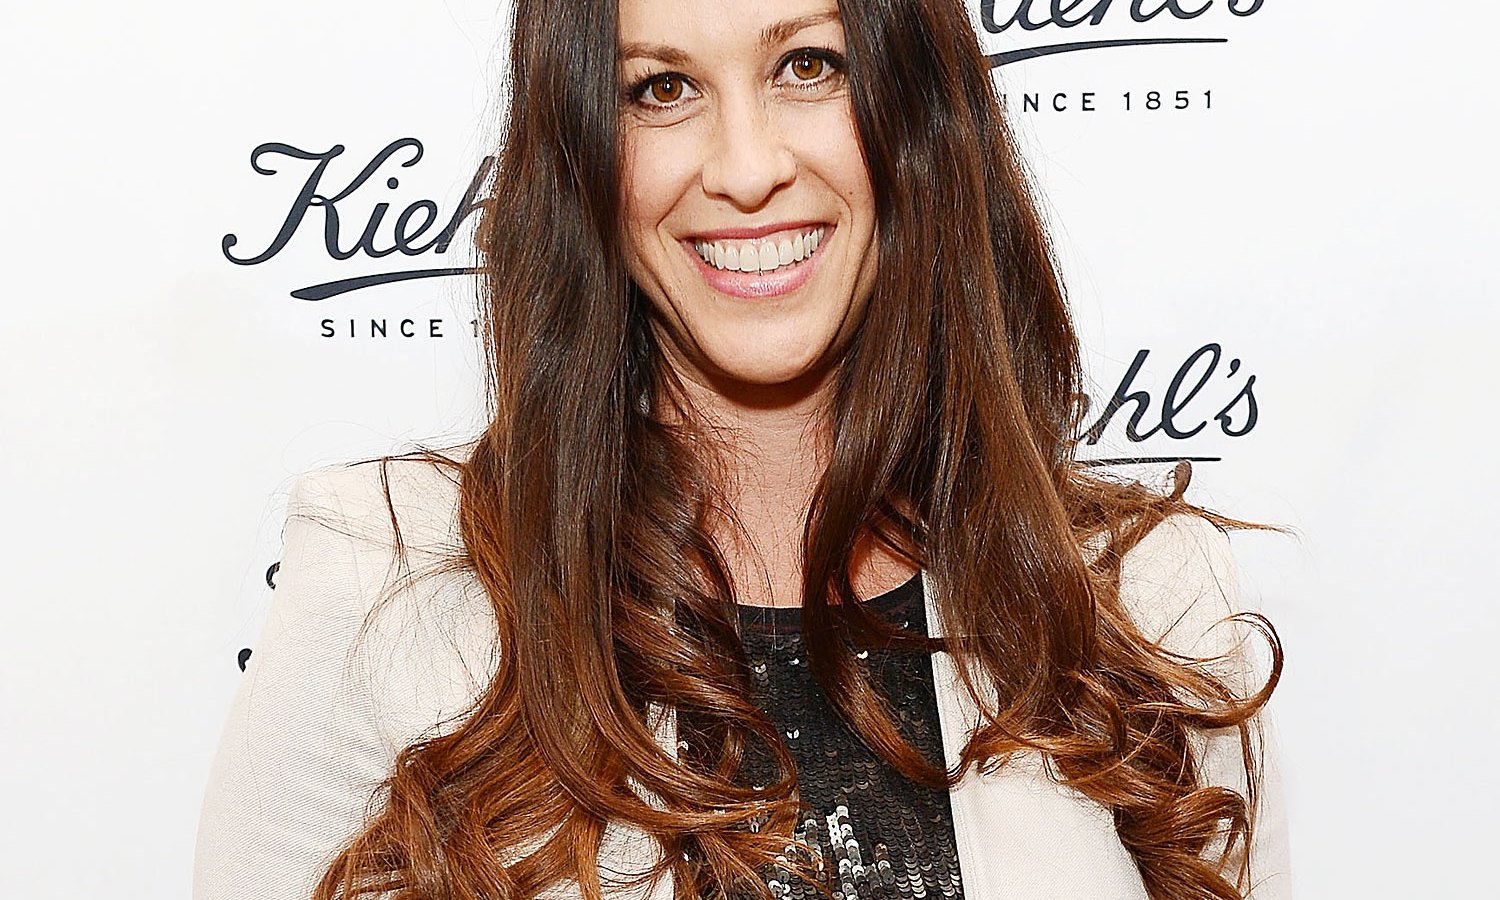 Alanis Morissette's Jagged Little Pill album is heading to Broadway in...